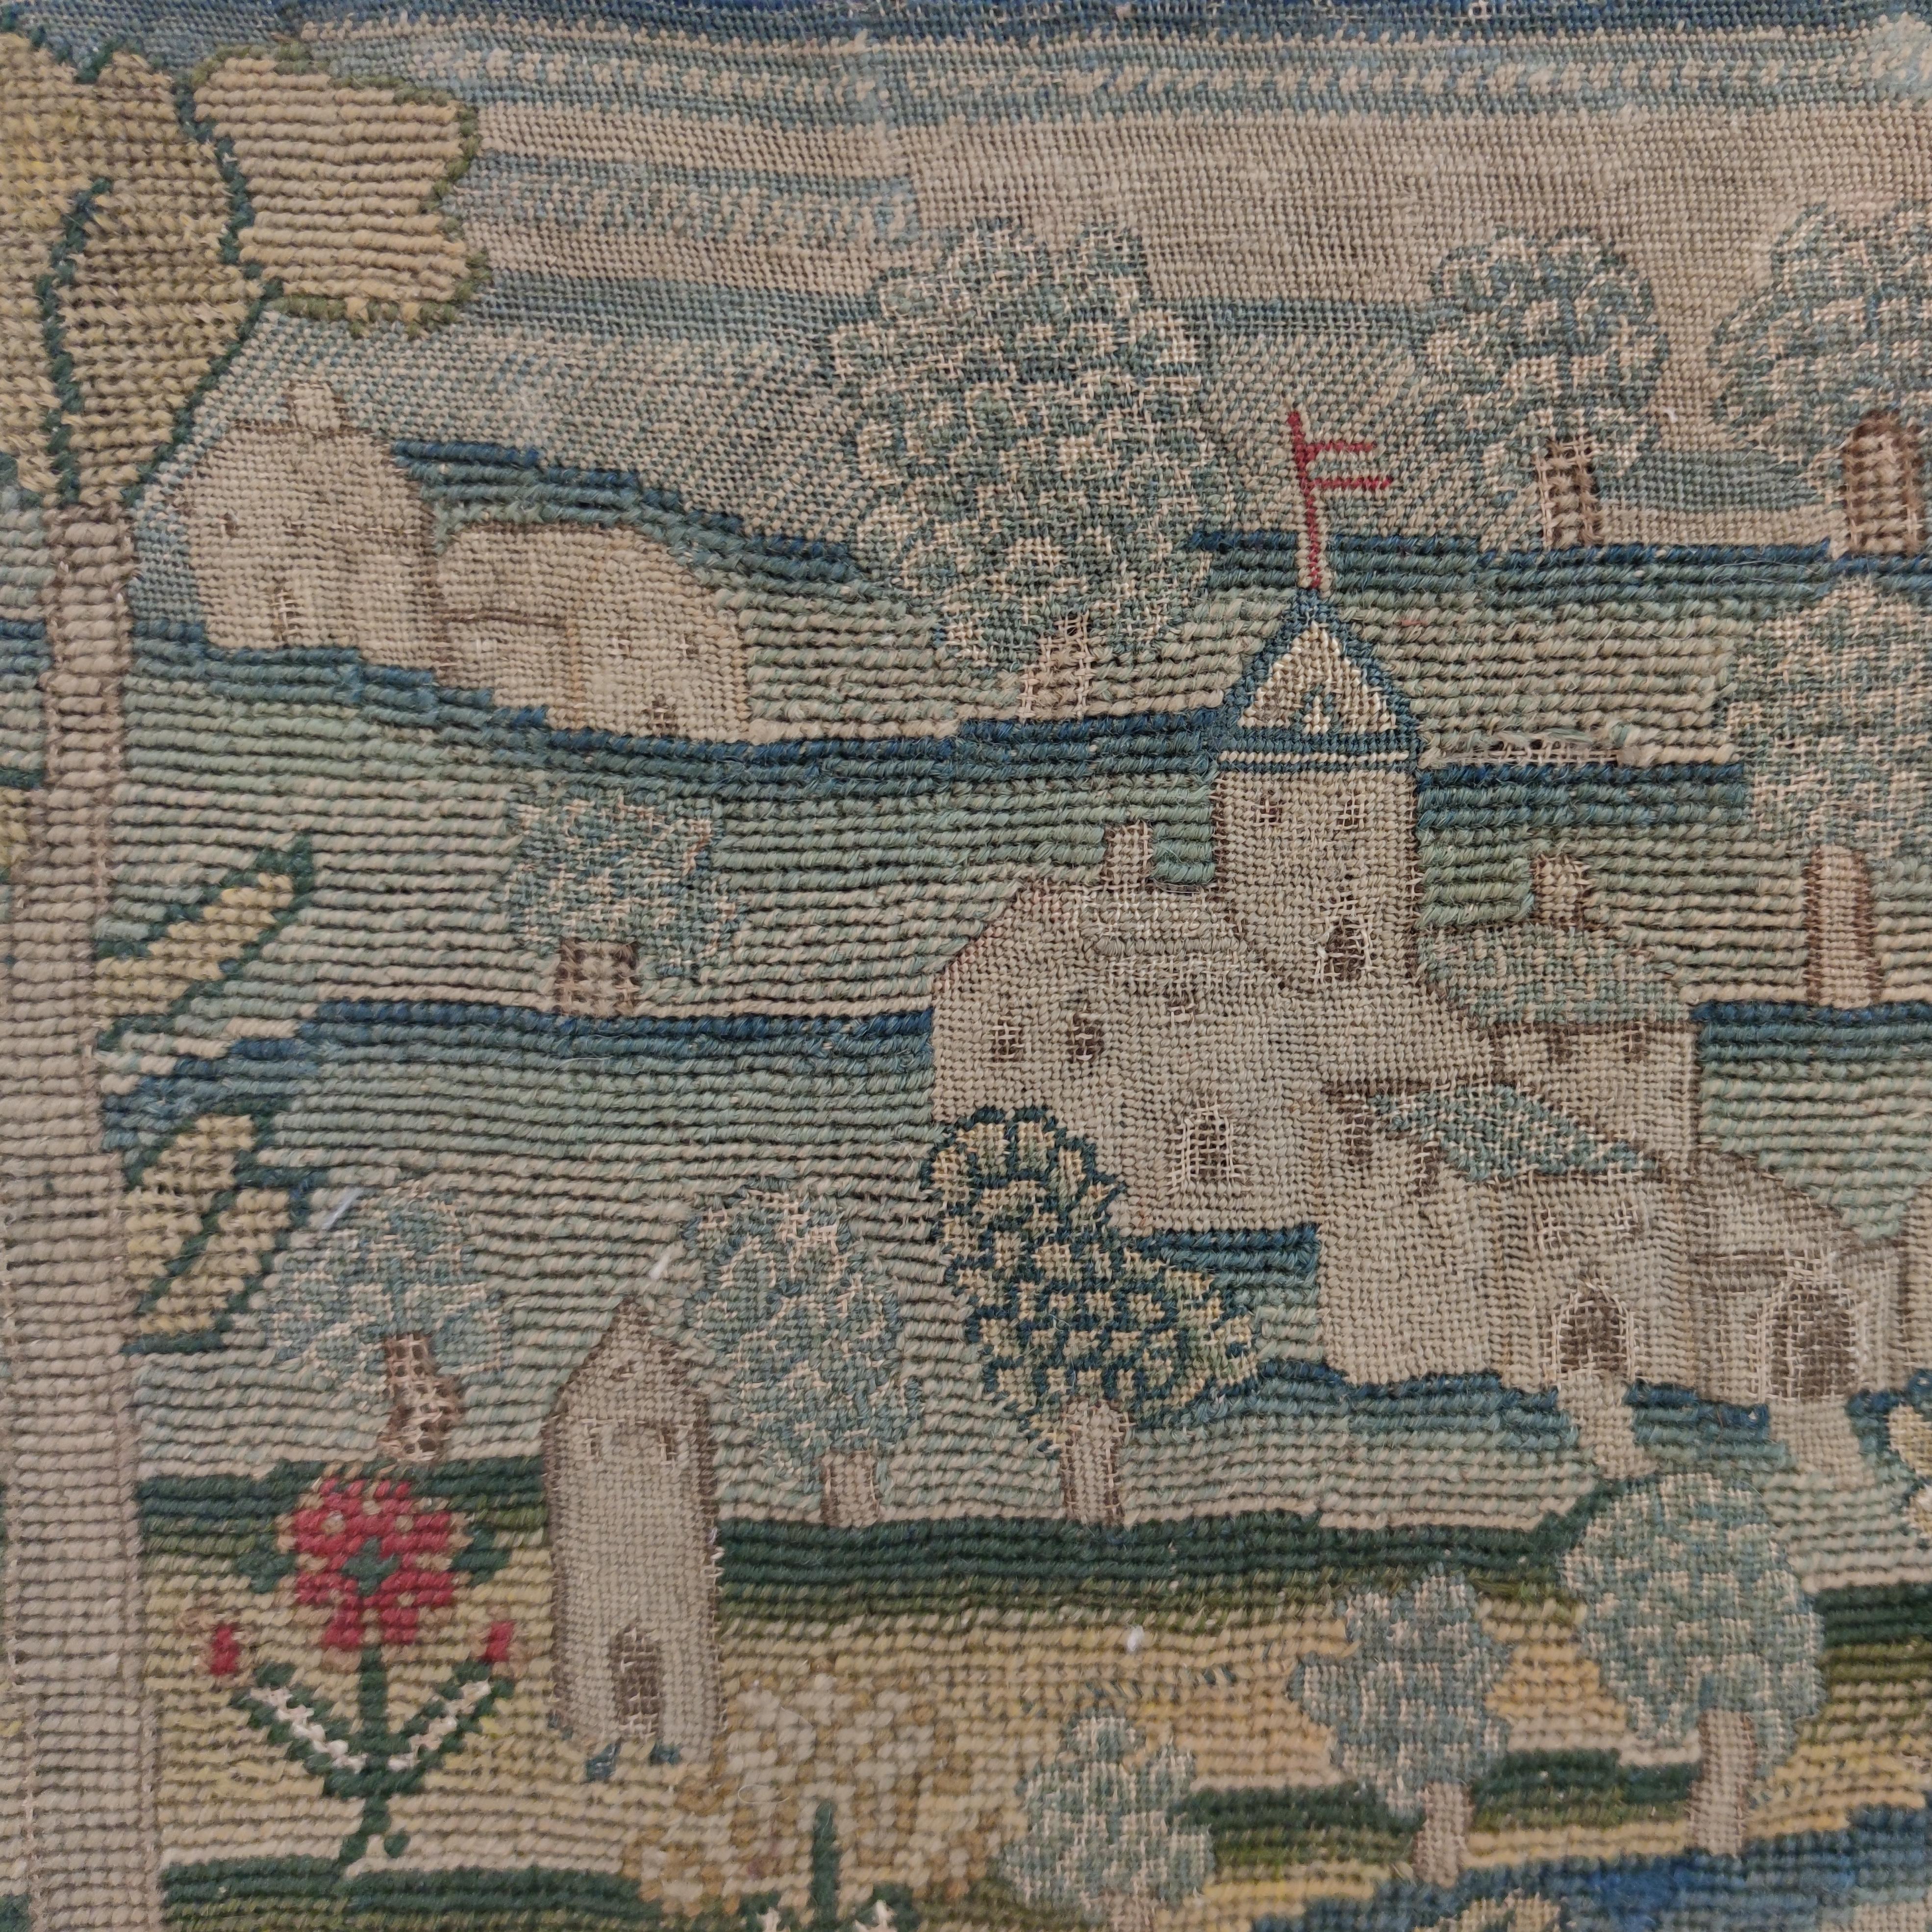 Finely worked in gros and petit point in silk and wool, this English needlepoint picture dates to the early part of the 17th century. It is complete with the side selvedges and was originally commissioned as a small hanging. It is now mounted on a